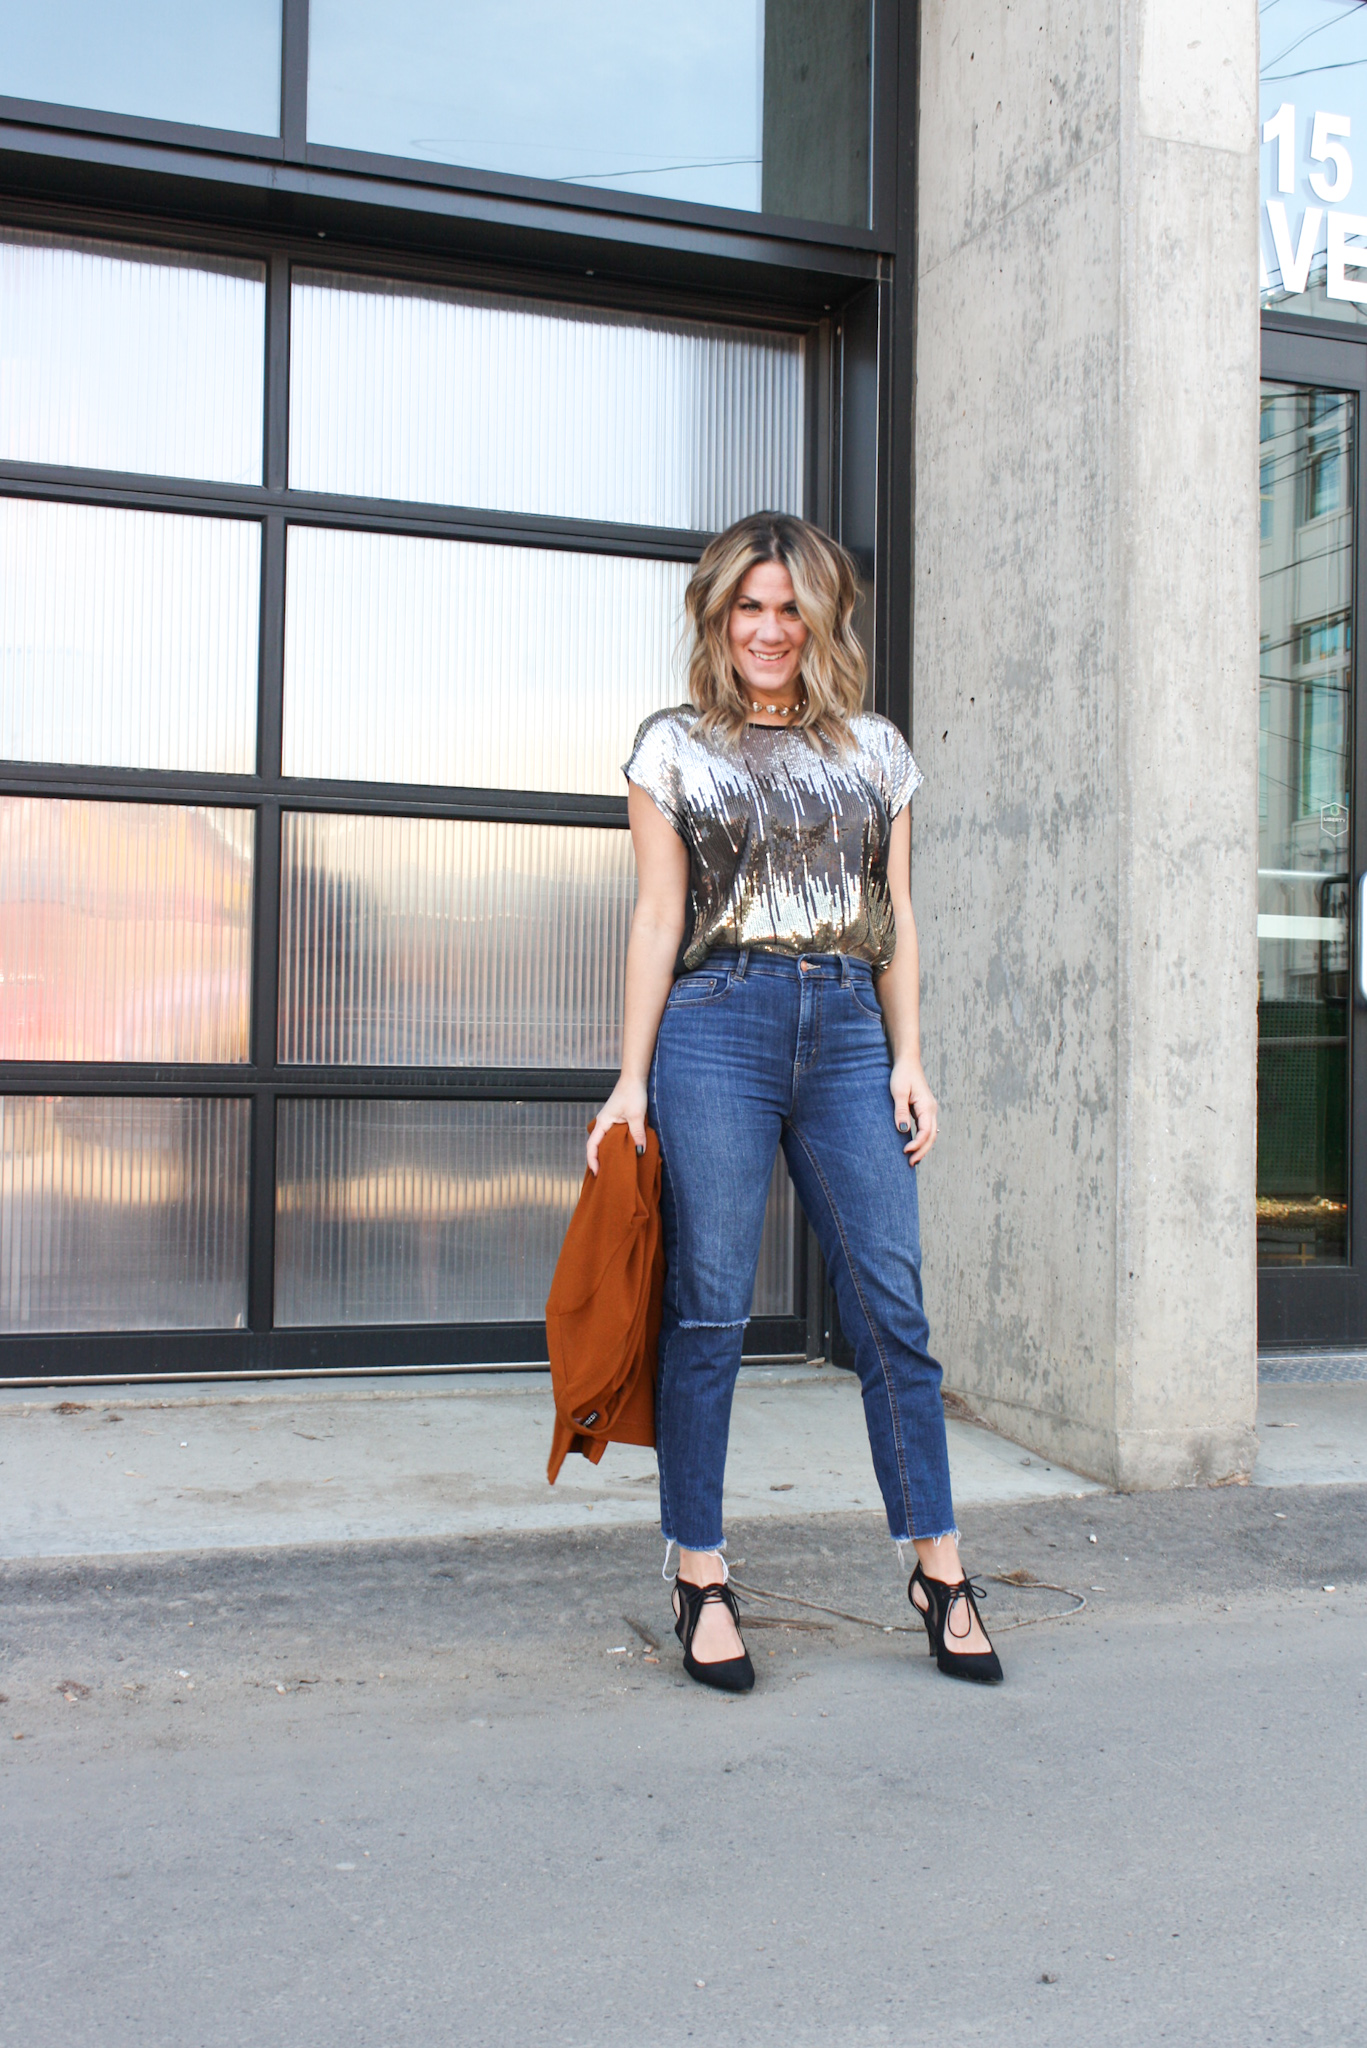 Sheer Sequin Top + Jeans, Heels and a Duster: